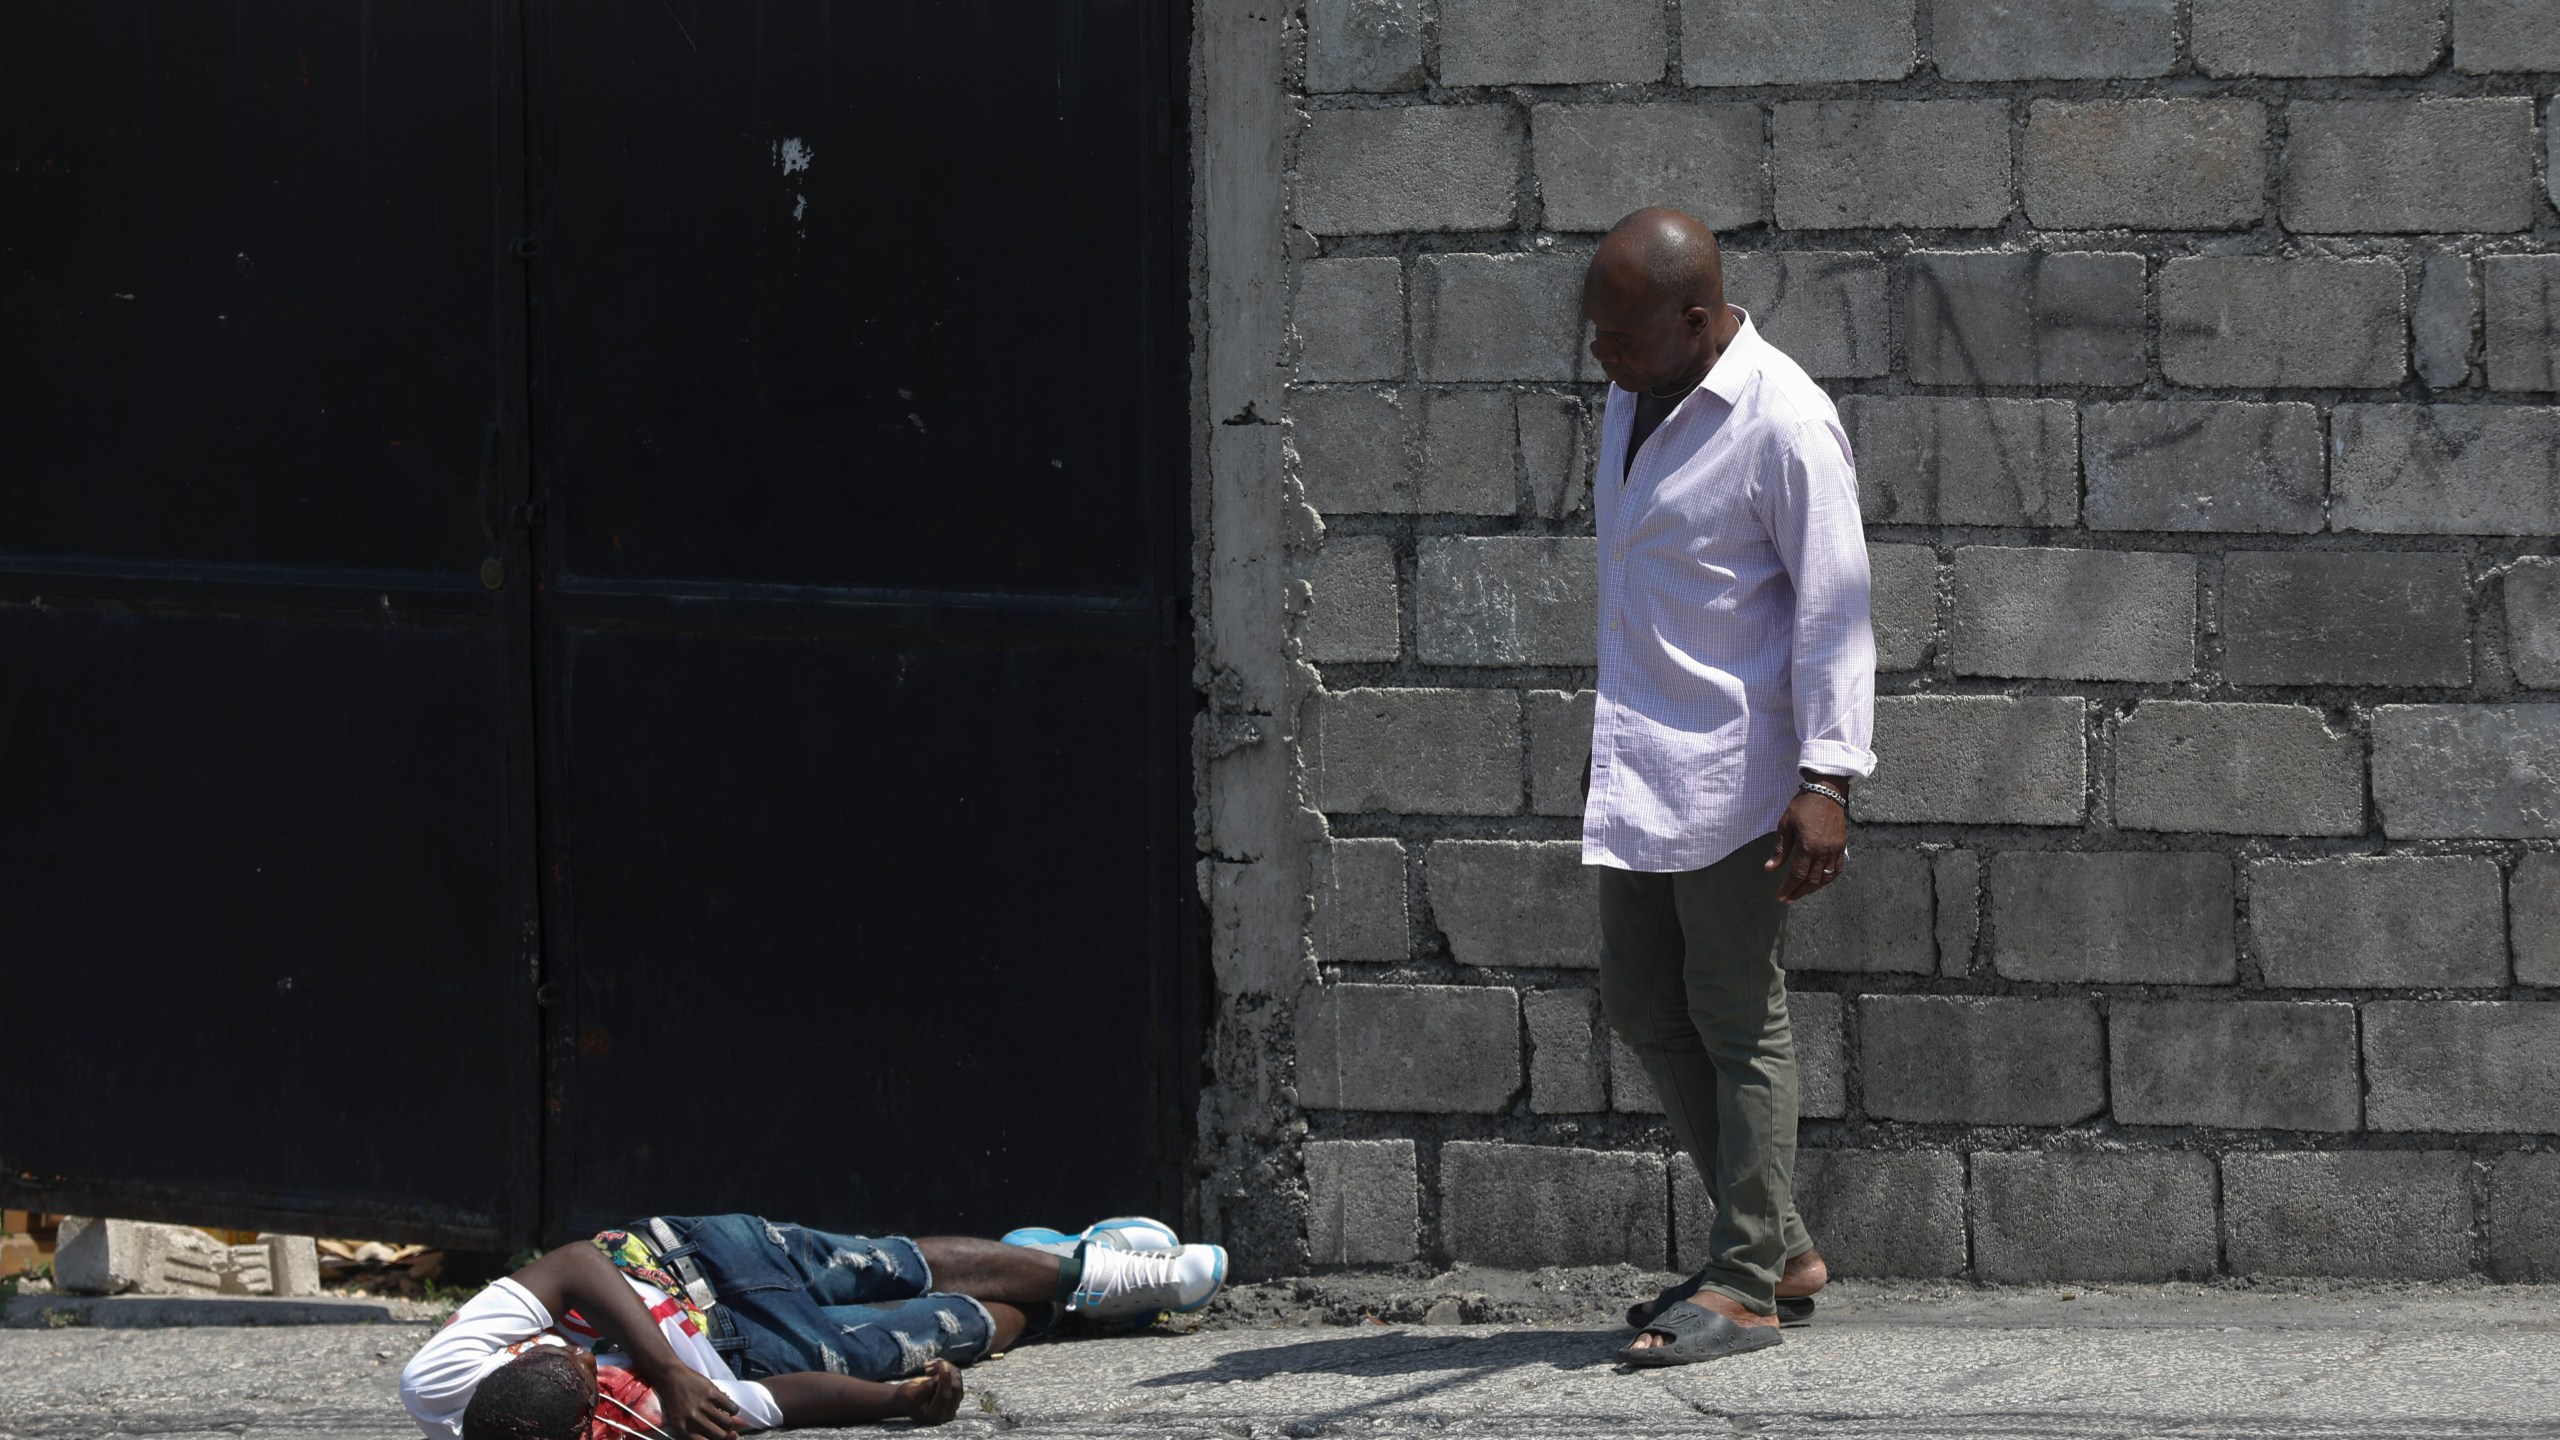 A resident looks at a body lying in the street in the Delmas area of Port-au-Prince, Haiti, Wednesday, March 20, 2024. The red item next to the body is a cell phone. (AP Photo/Odelyn Joseph)